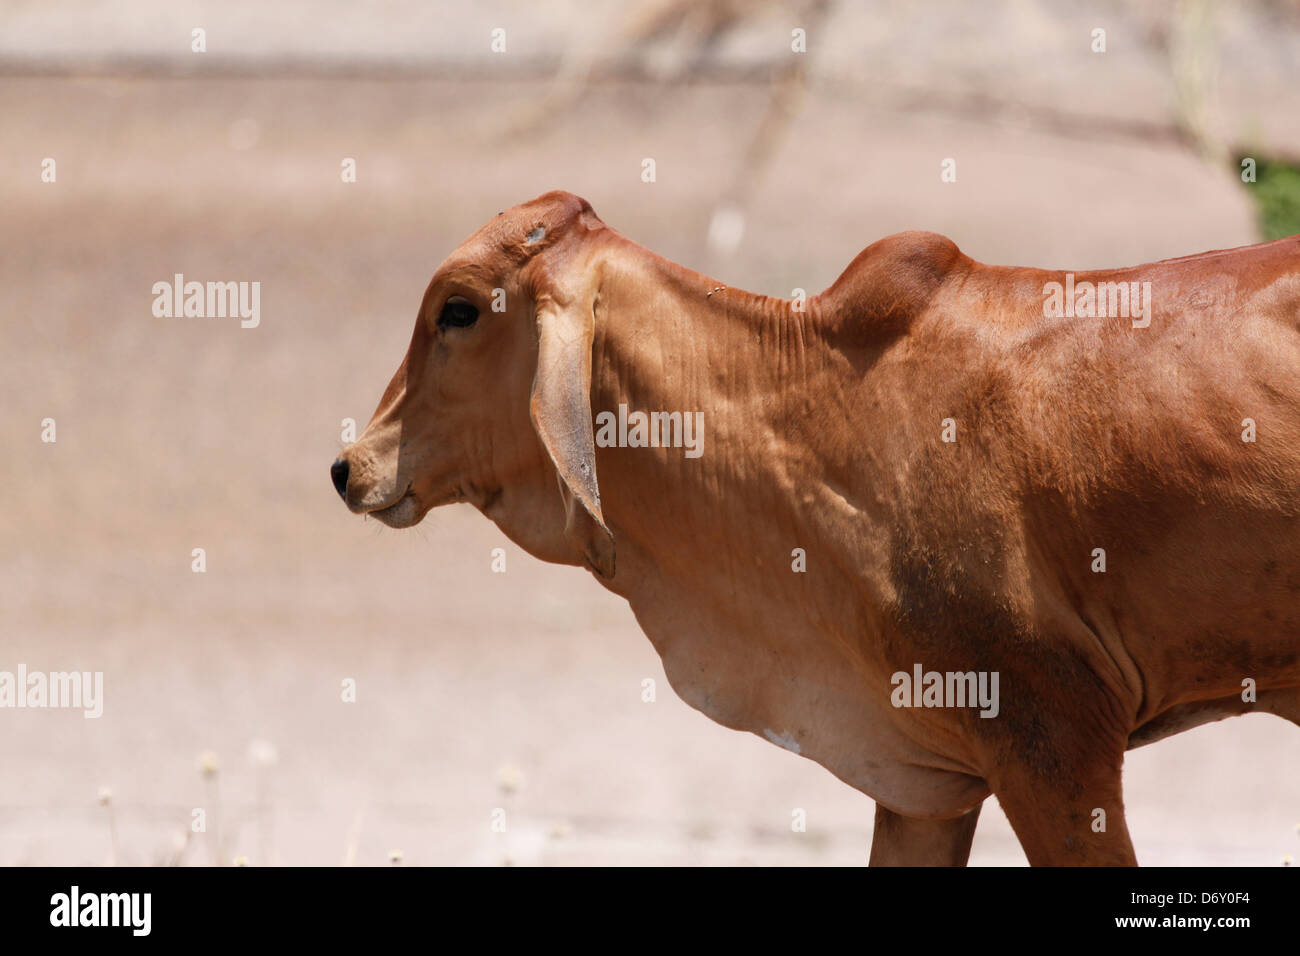 The Brown Cow is Walking go to home,After coming to graze. Stock Photo